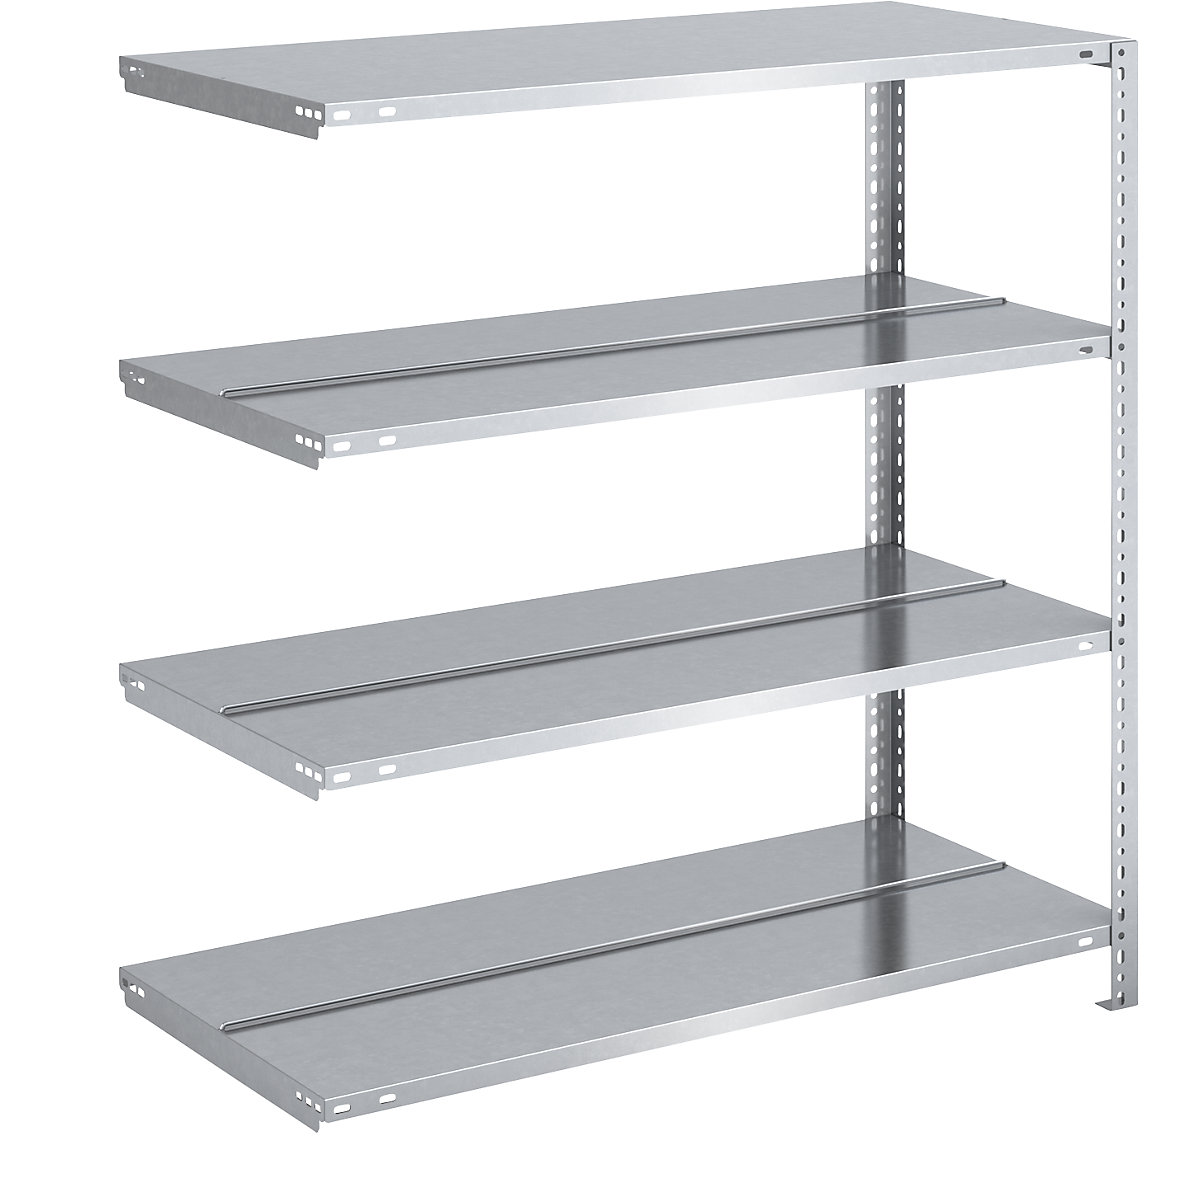 Bolt-together archive shelving, zinc plated – hofe, shelf height 1150 mm, double sided, extension shelf, width x depth 1000 x 600 mm-5